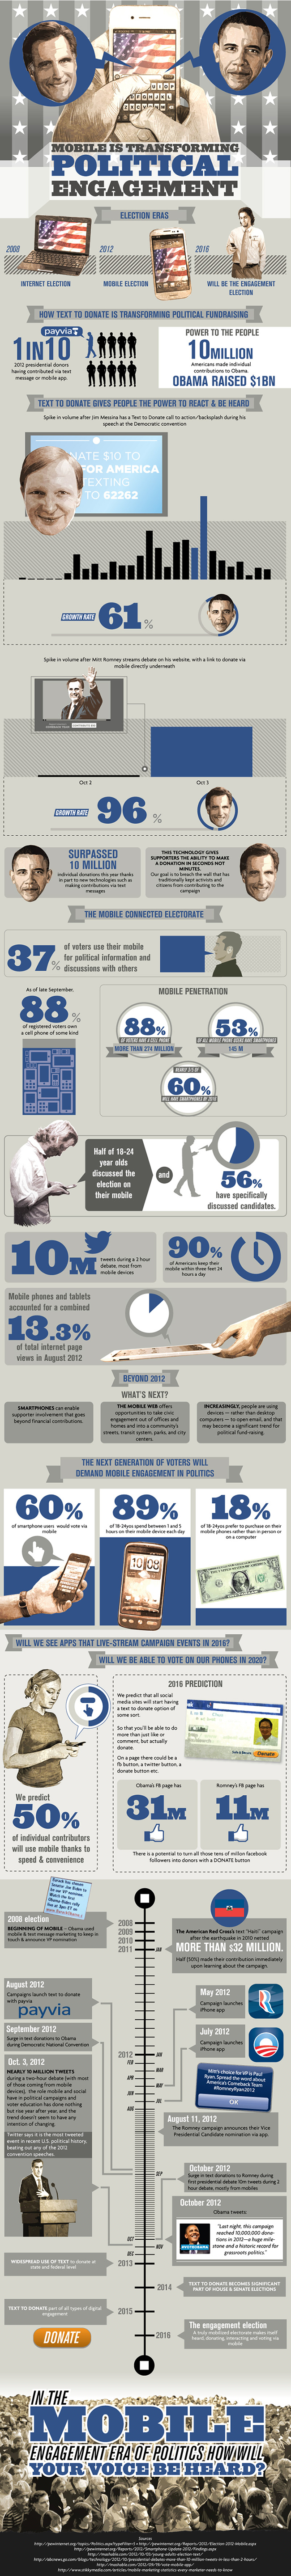 Political campaigns go mobile: infographic